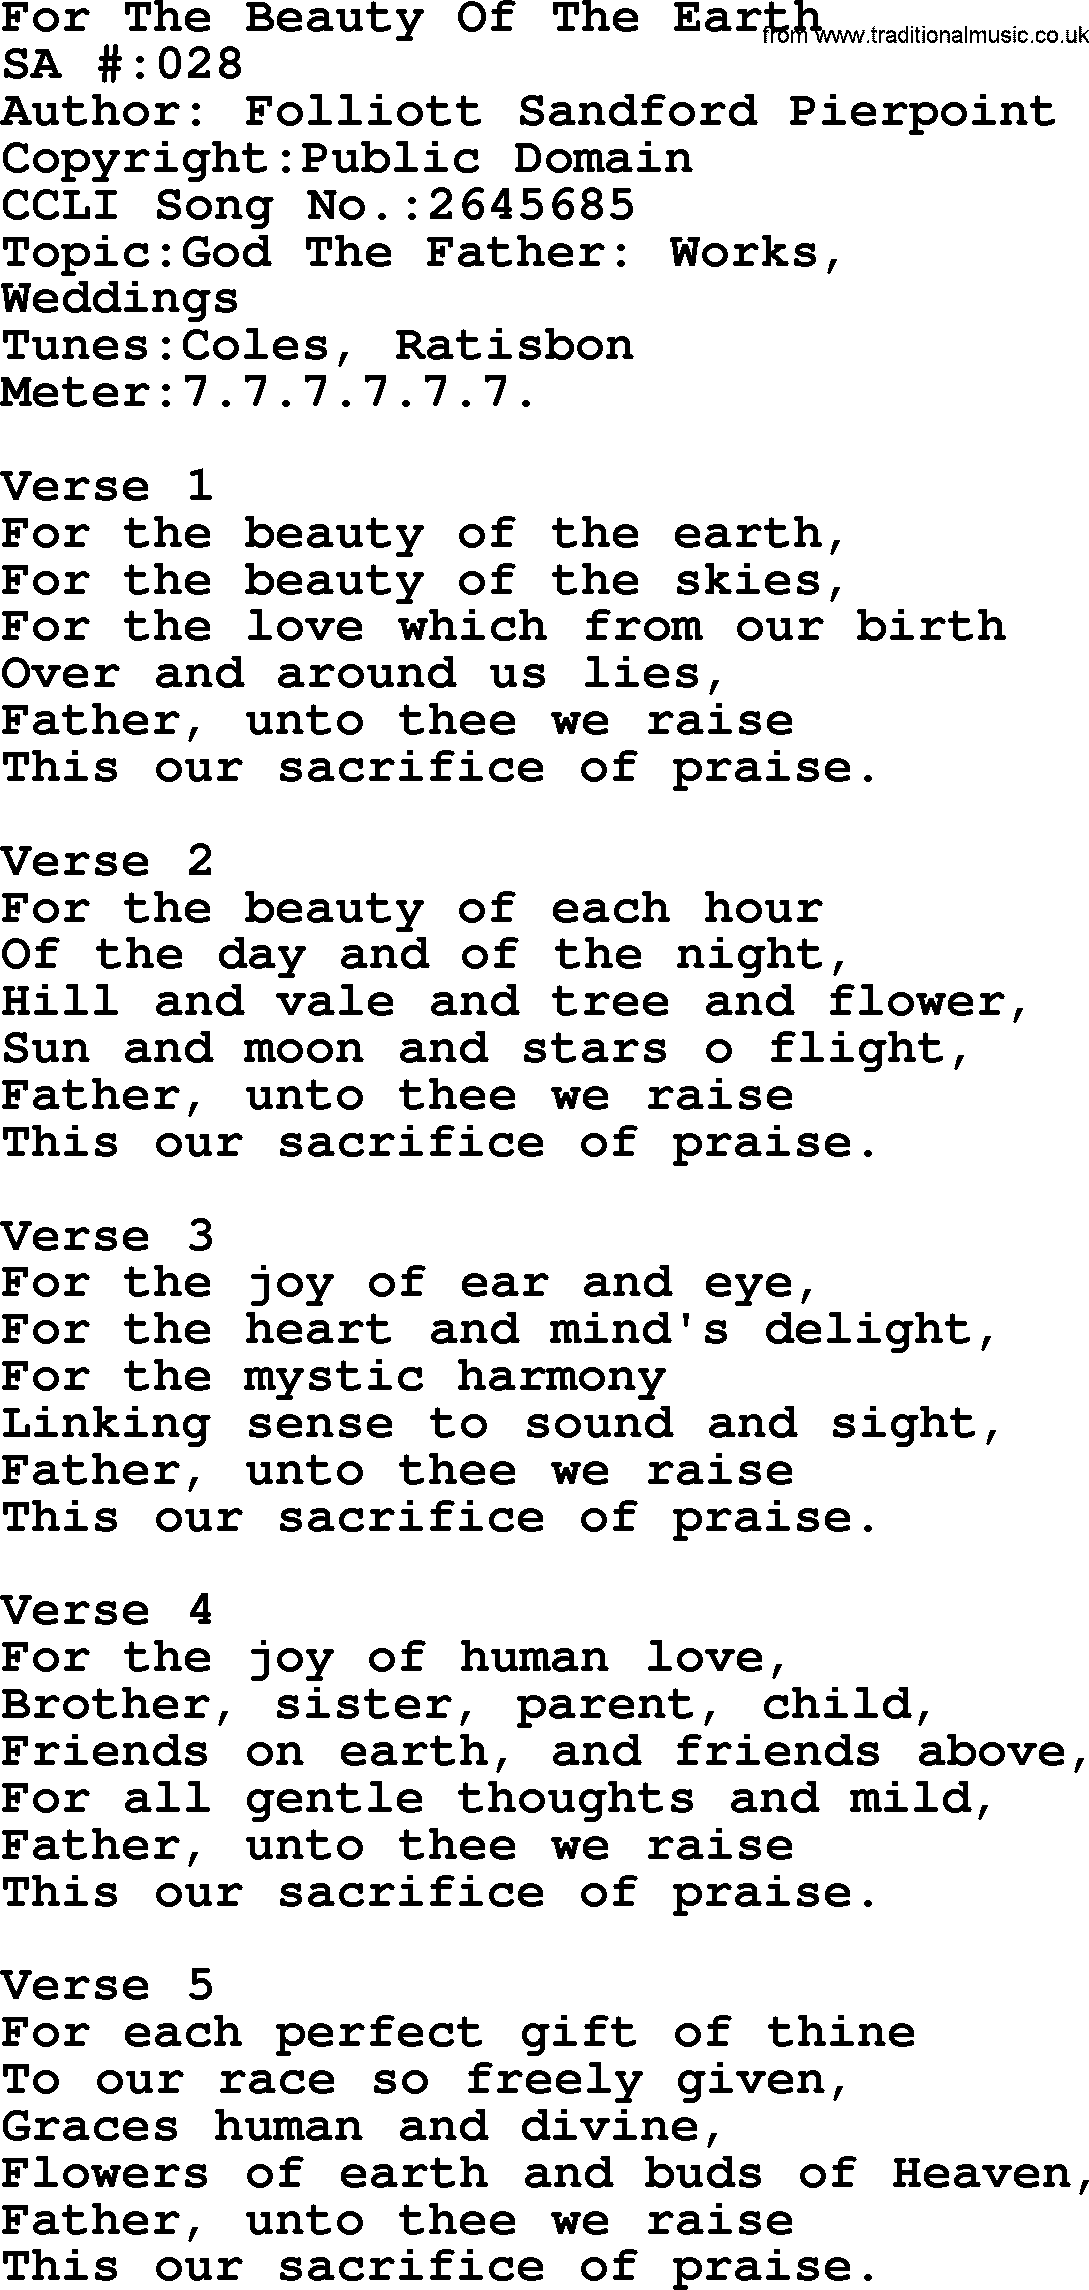 Salvation Army Hymnal, title: For The Beauty Of The Earth, with lyrics and PDF,